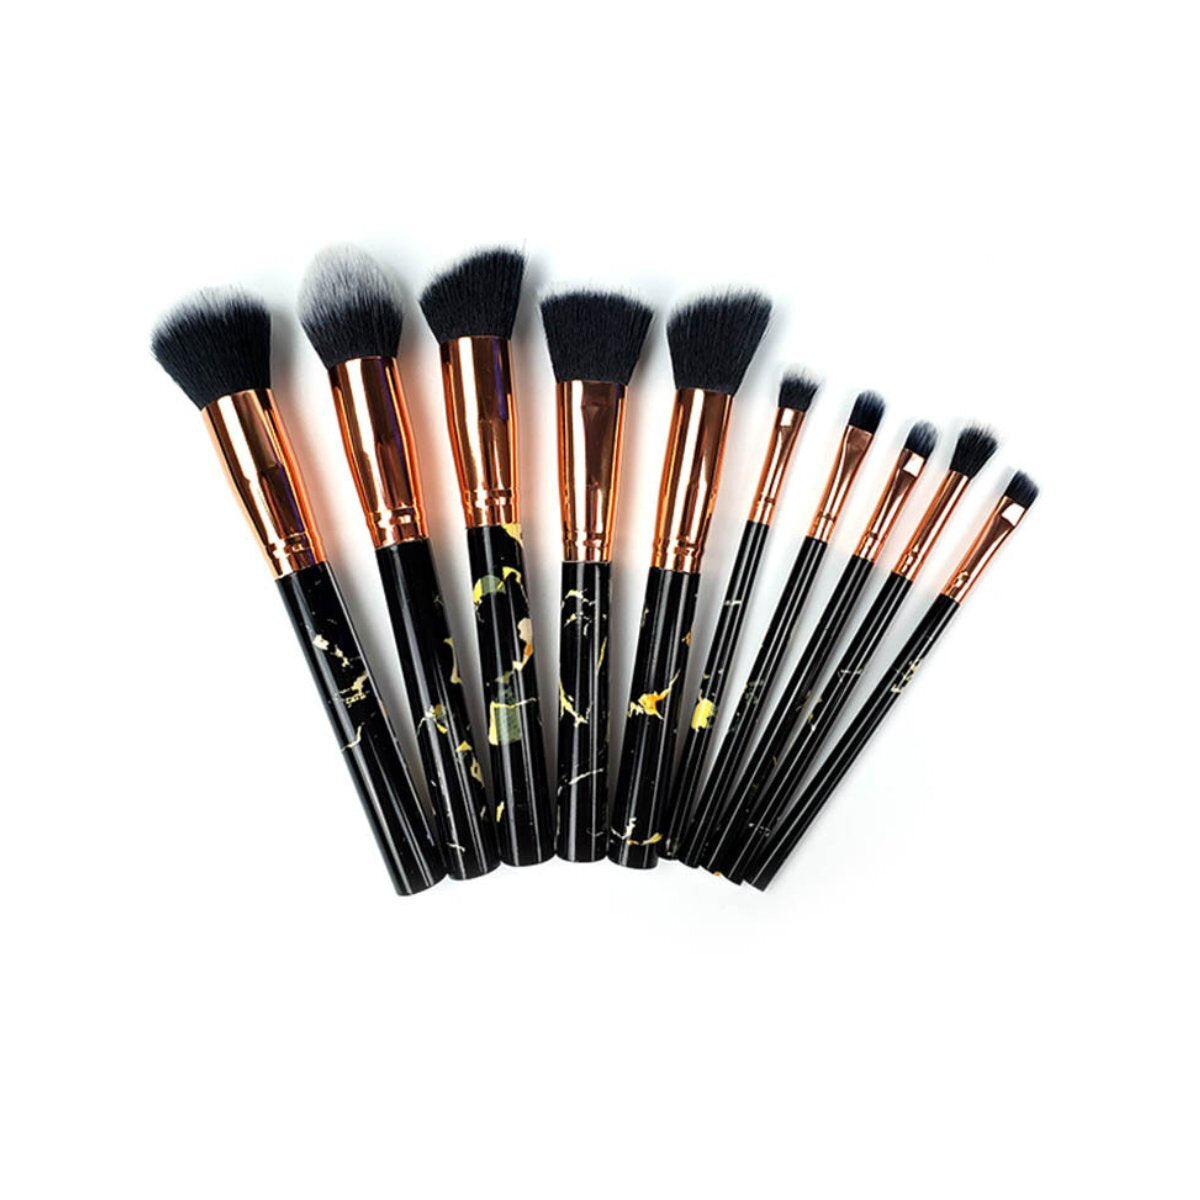 Color: Beauty Spot Black - La Canica 10 In 1 Makeup Brush Set With Travel Friendly Container